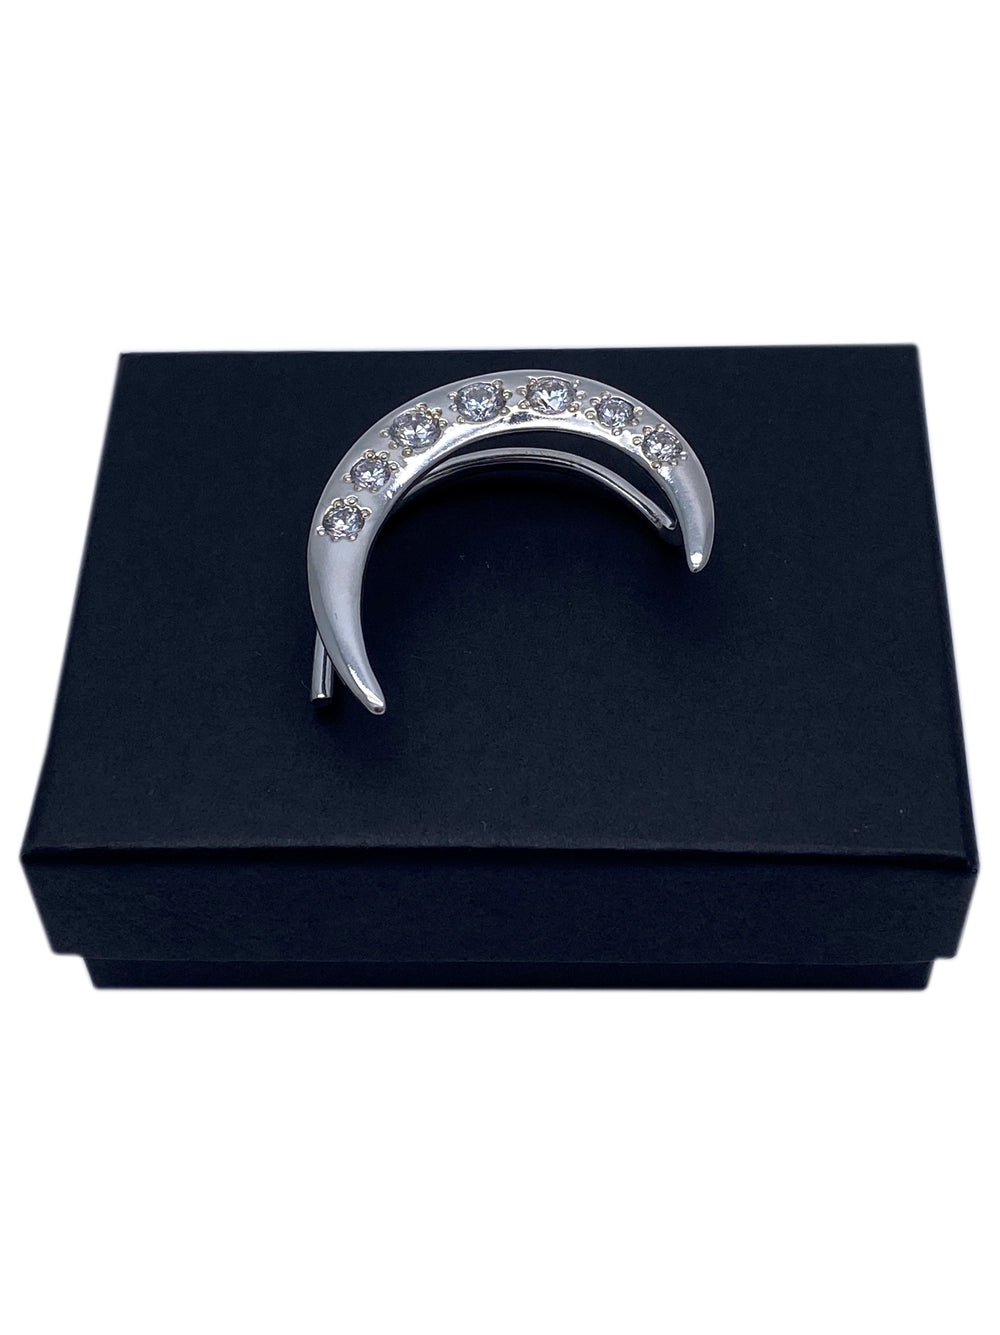 Crescent Moon Silver Marty Magic Cubic Zirconia Ear Wrap / Cuff Left Or Right Prince